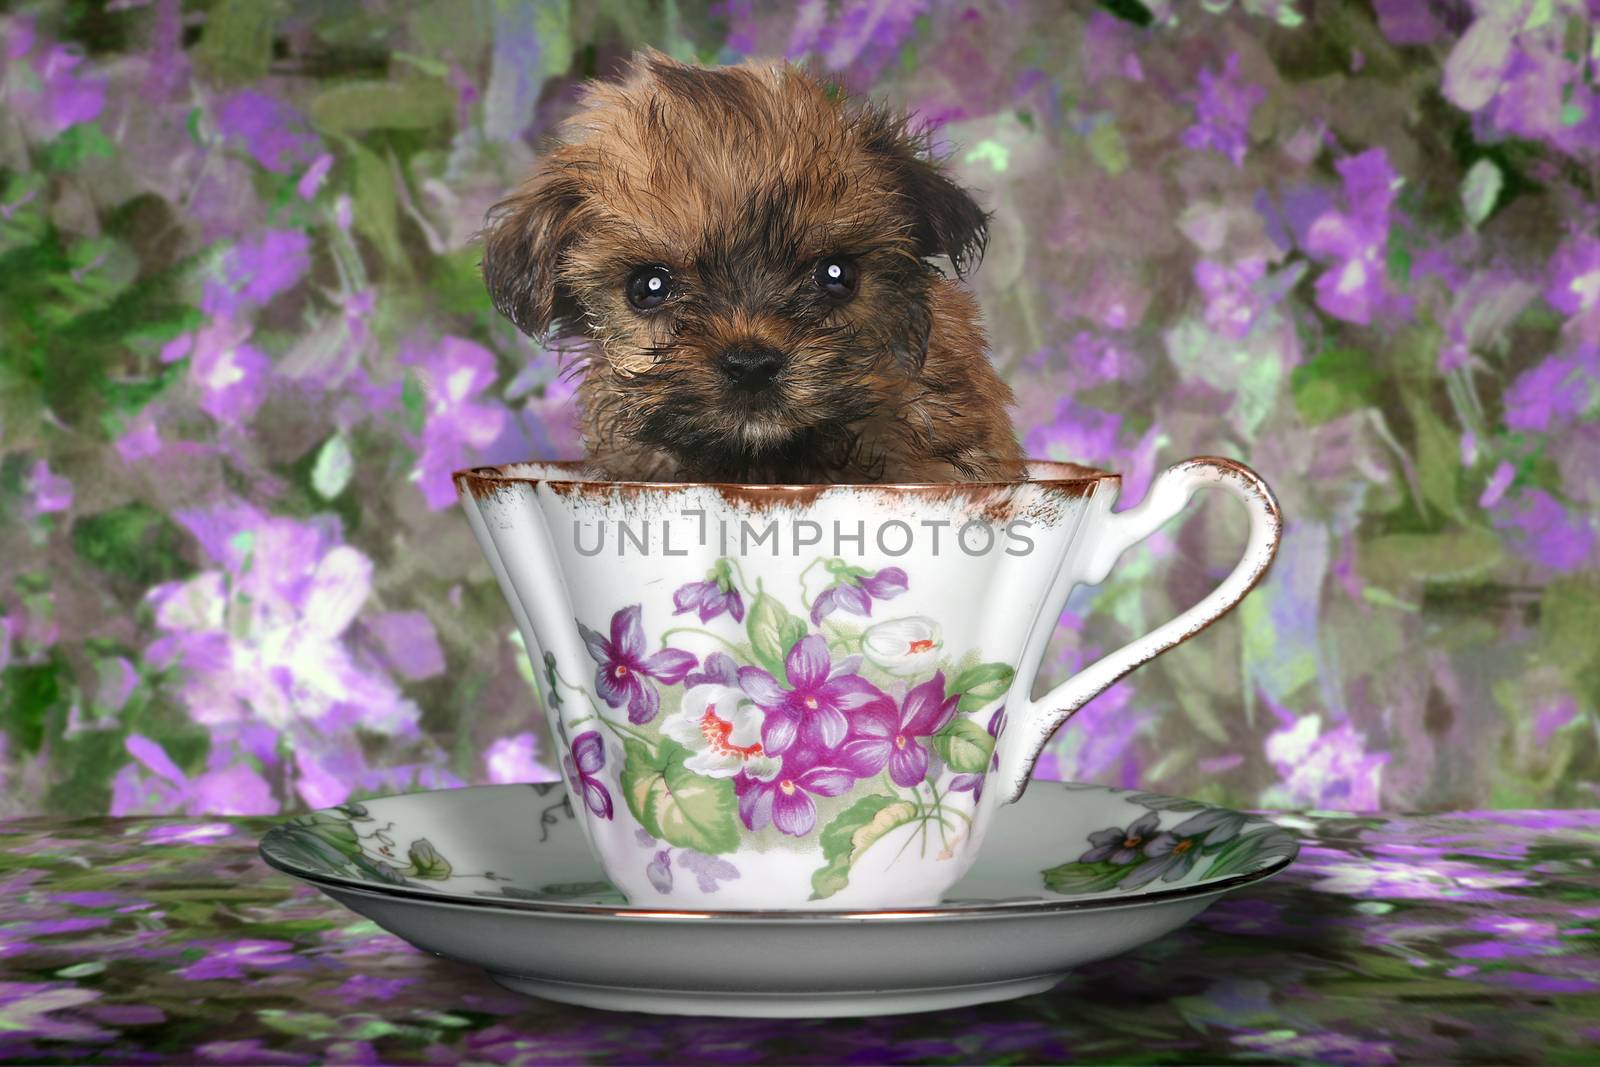 Adorable Yorkshire Terrier Puppy in a Teacup